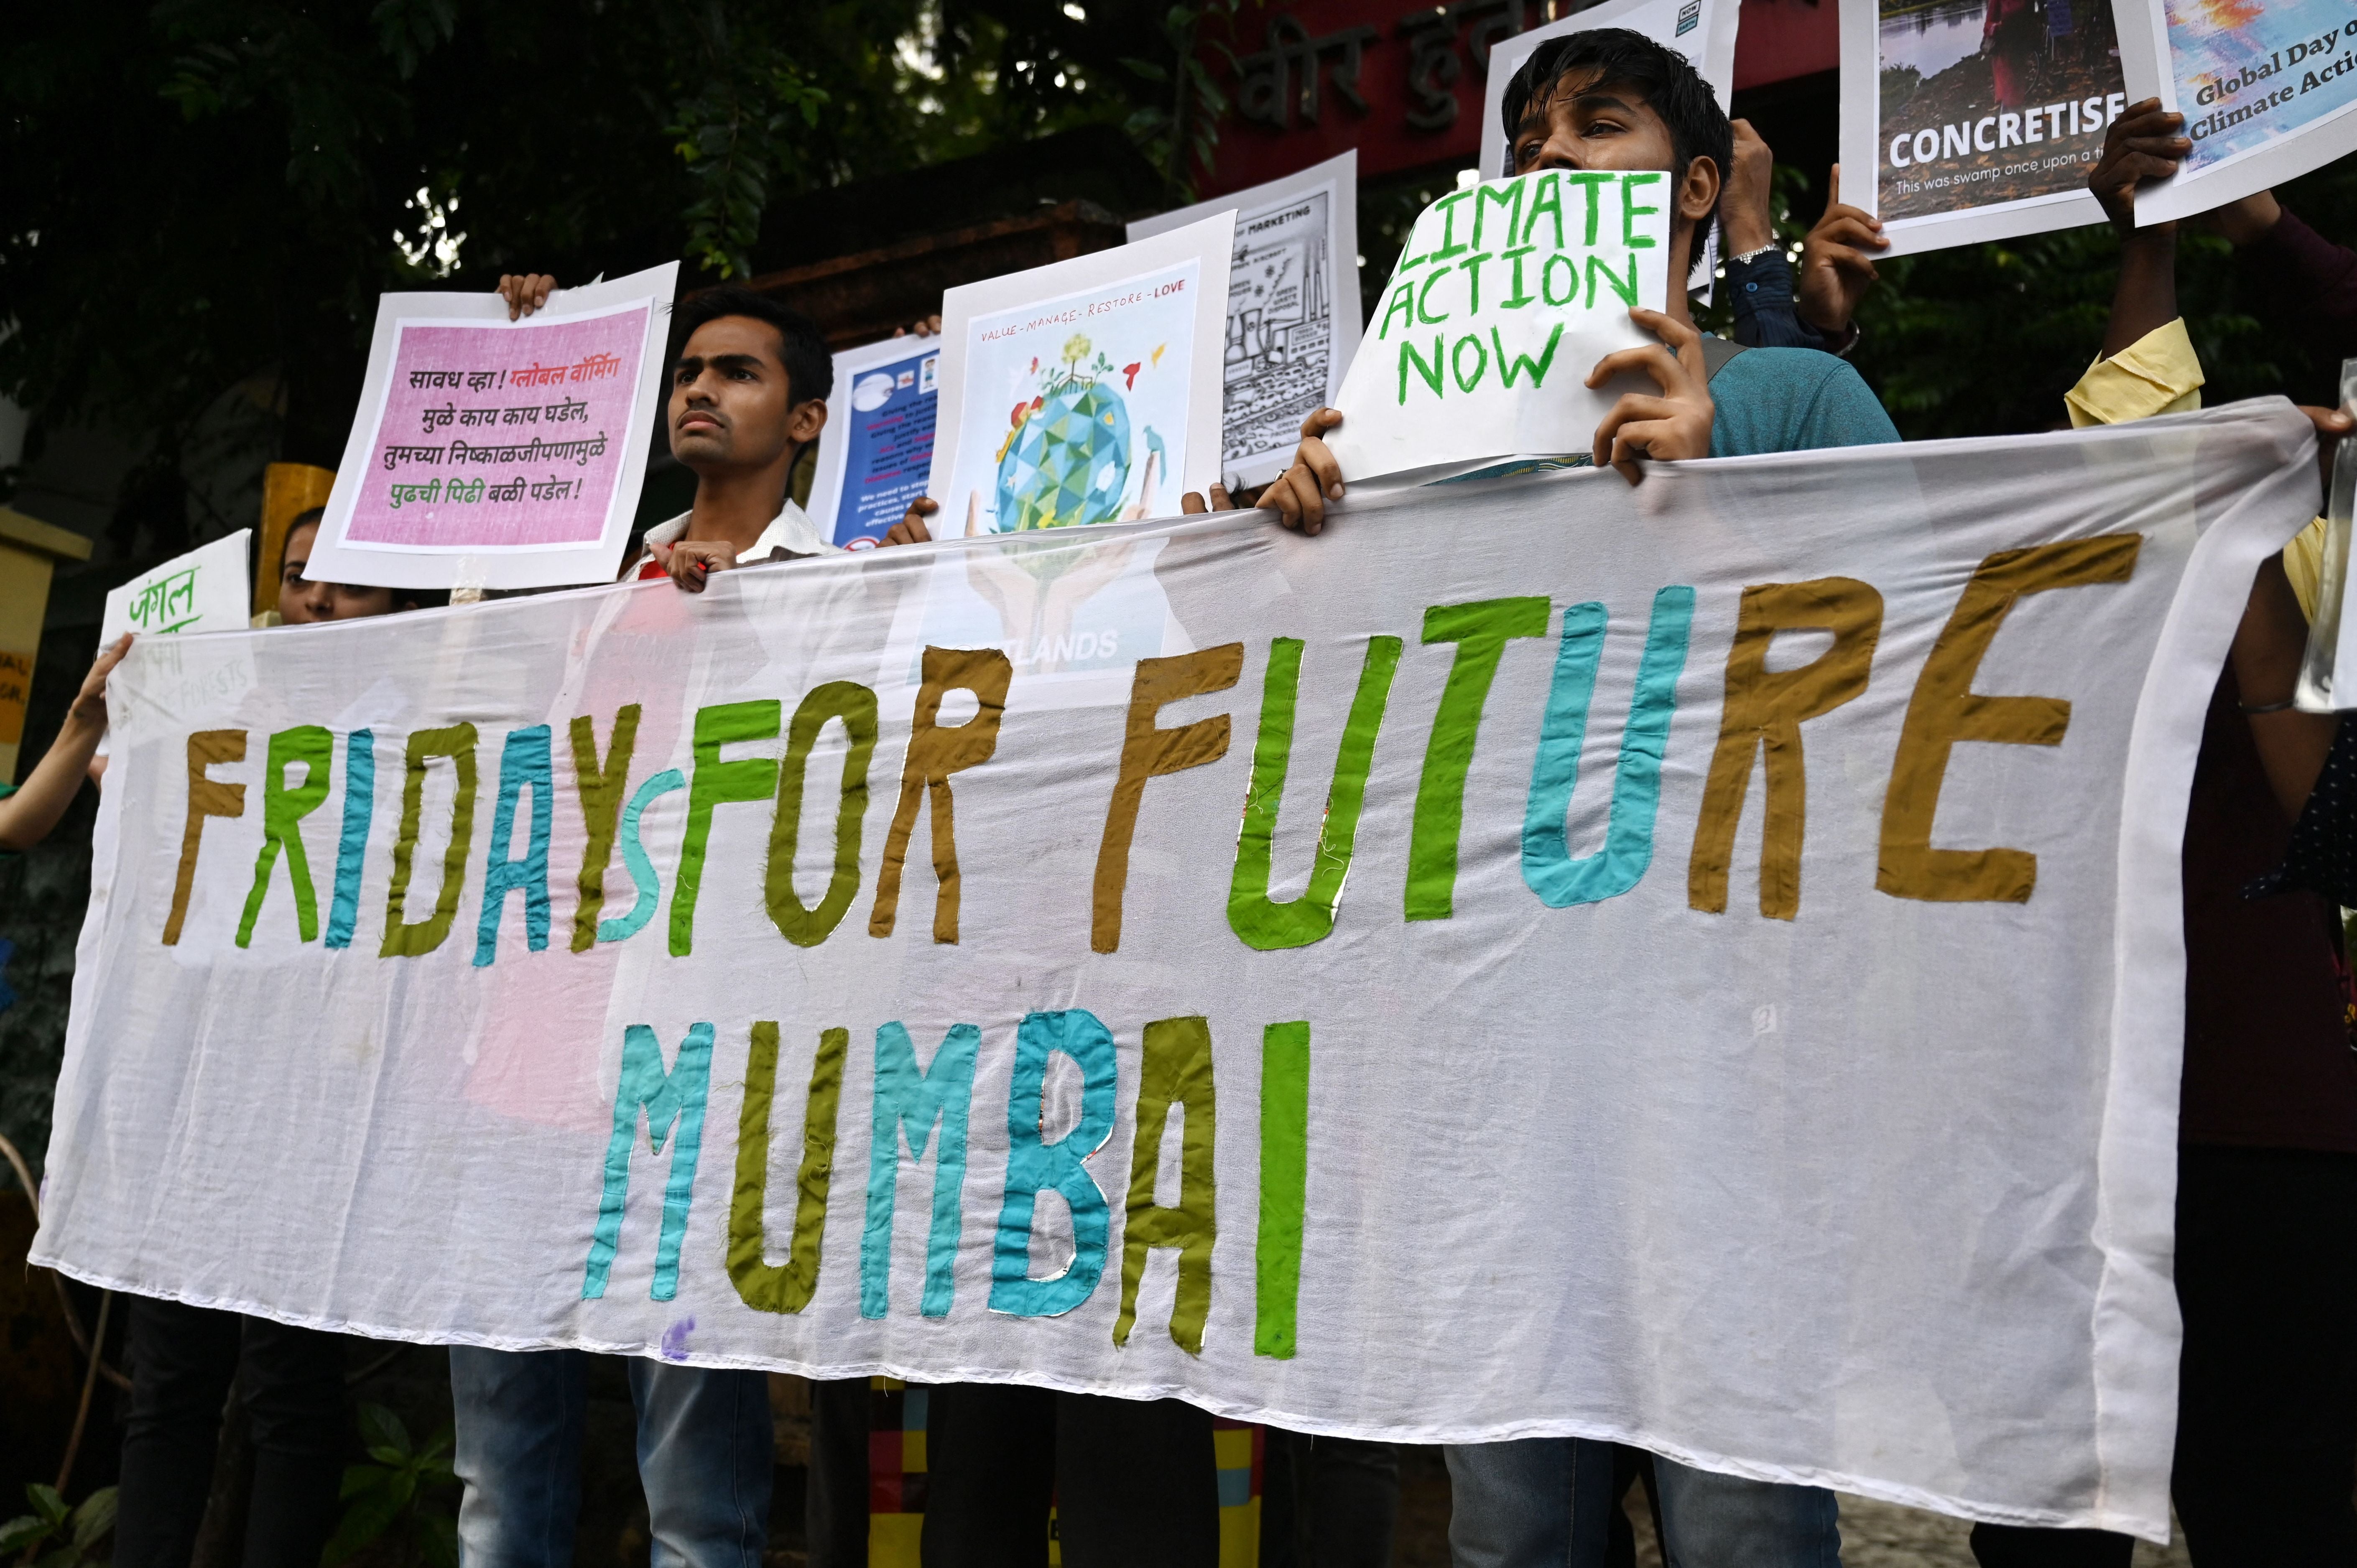 Young people protest against climate inaction in Mumbai on Saturday